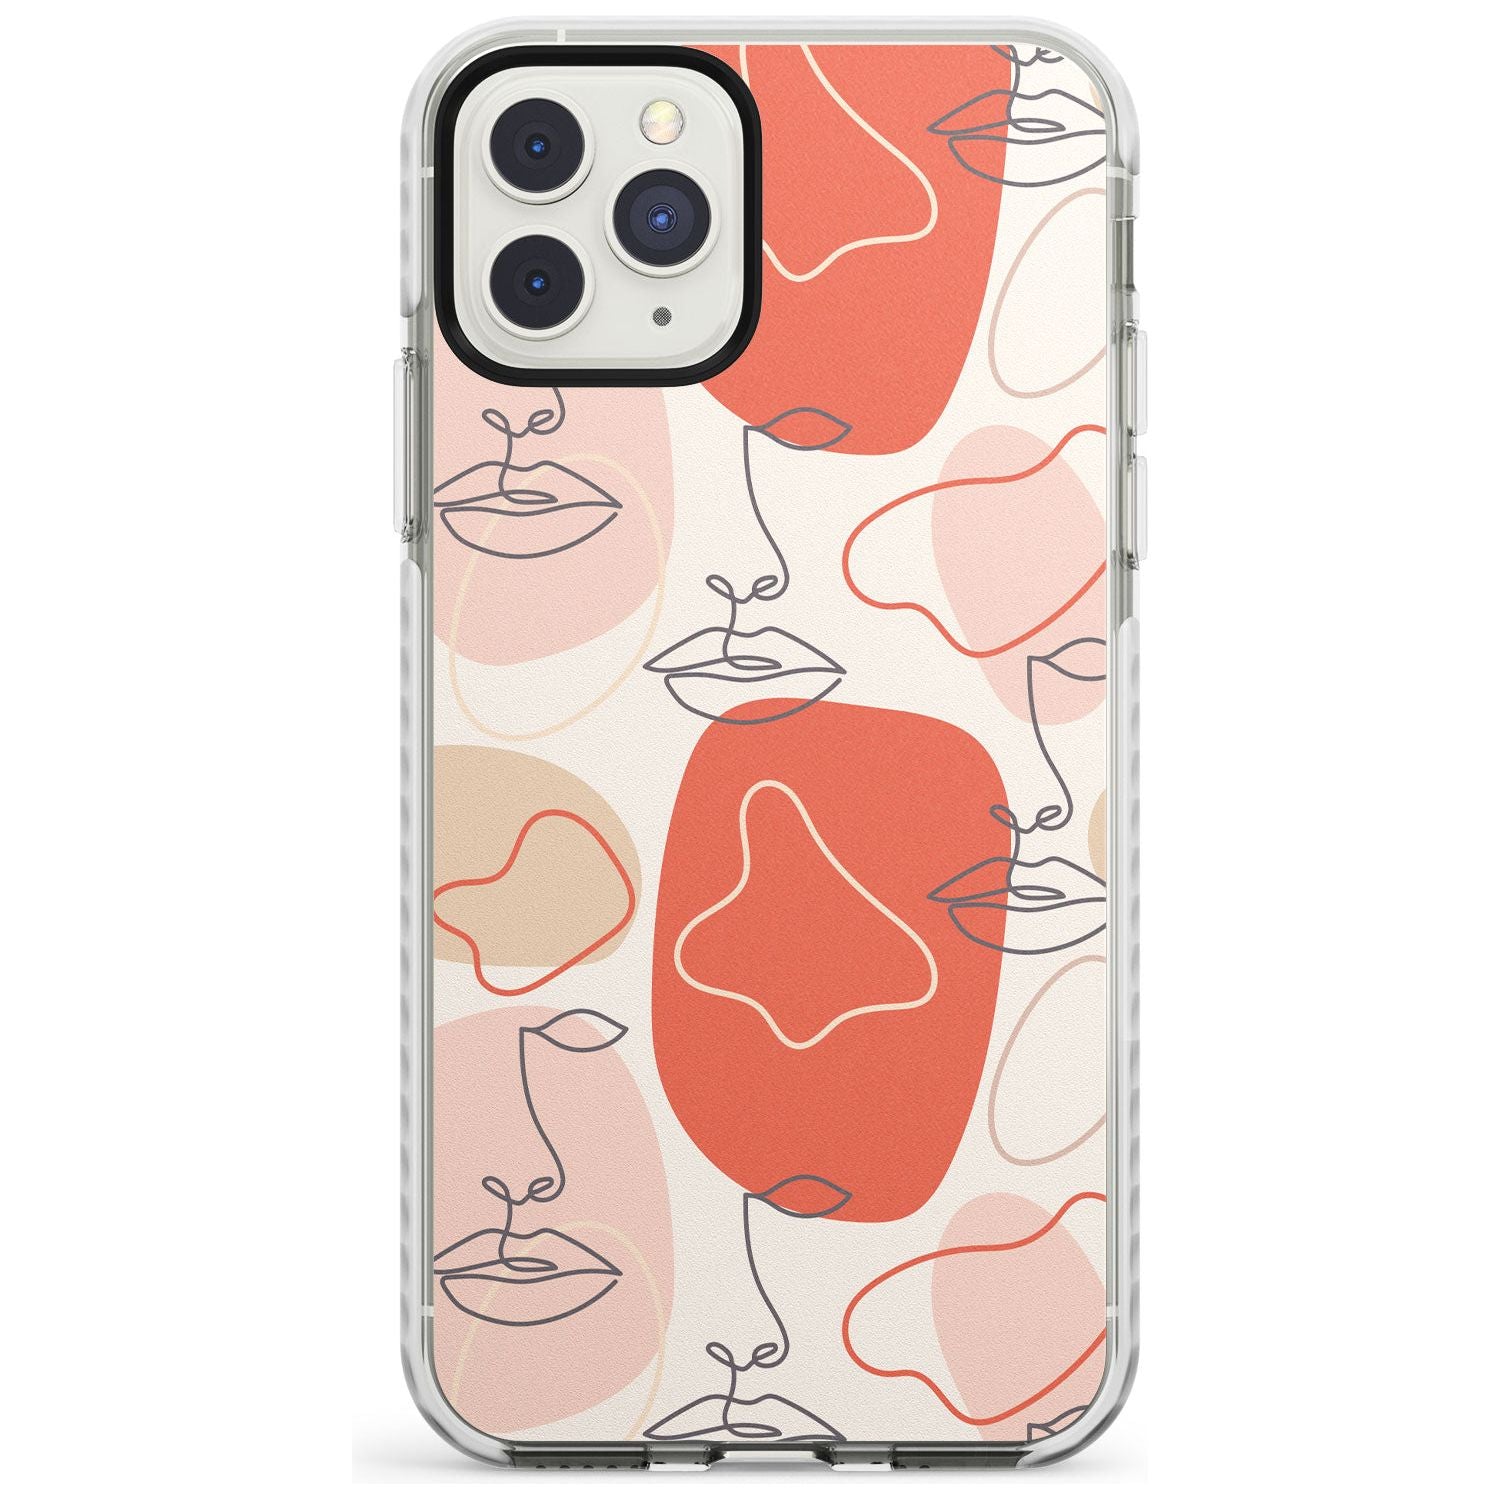 Minimal Line Art Stylish Abstract Faces Impact Phone Case for iPhone 11 Pro Max